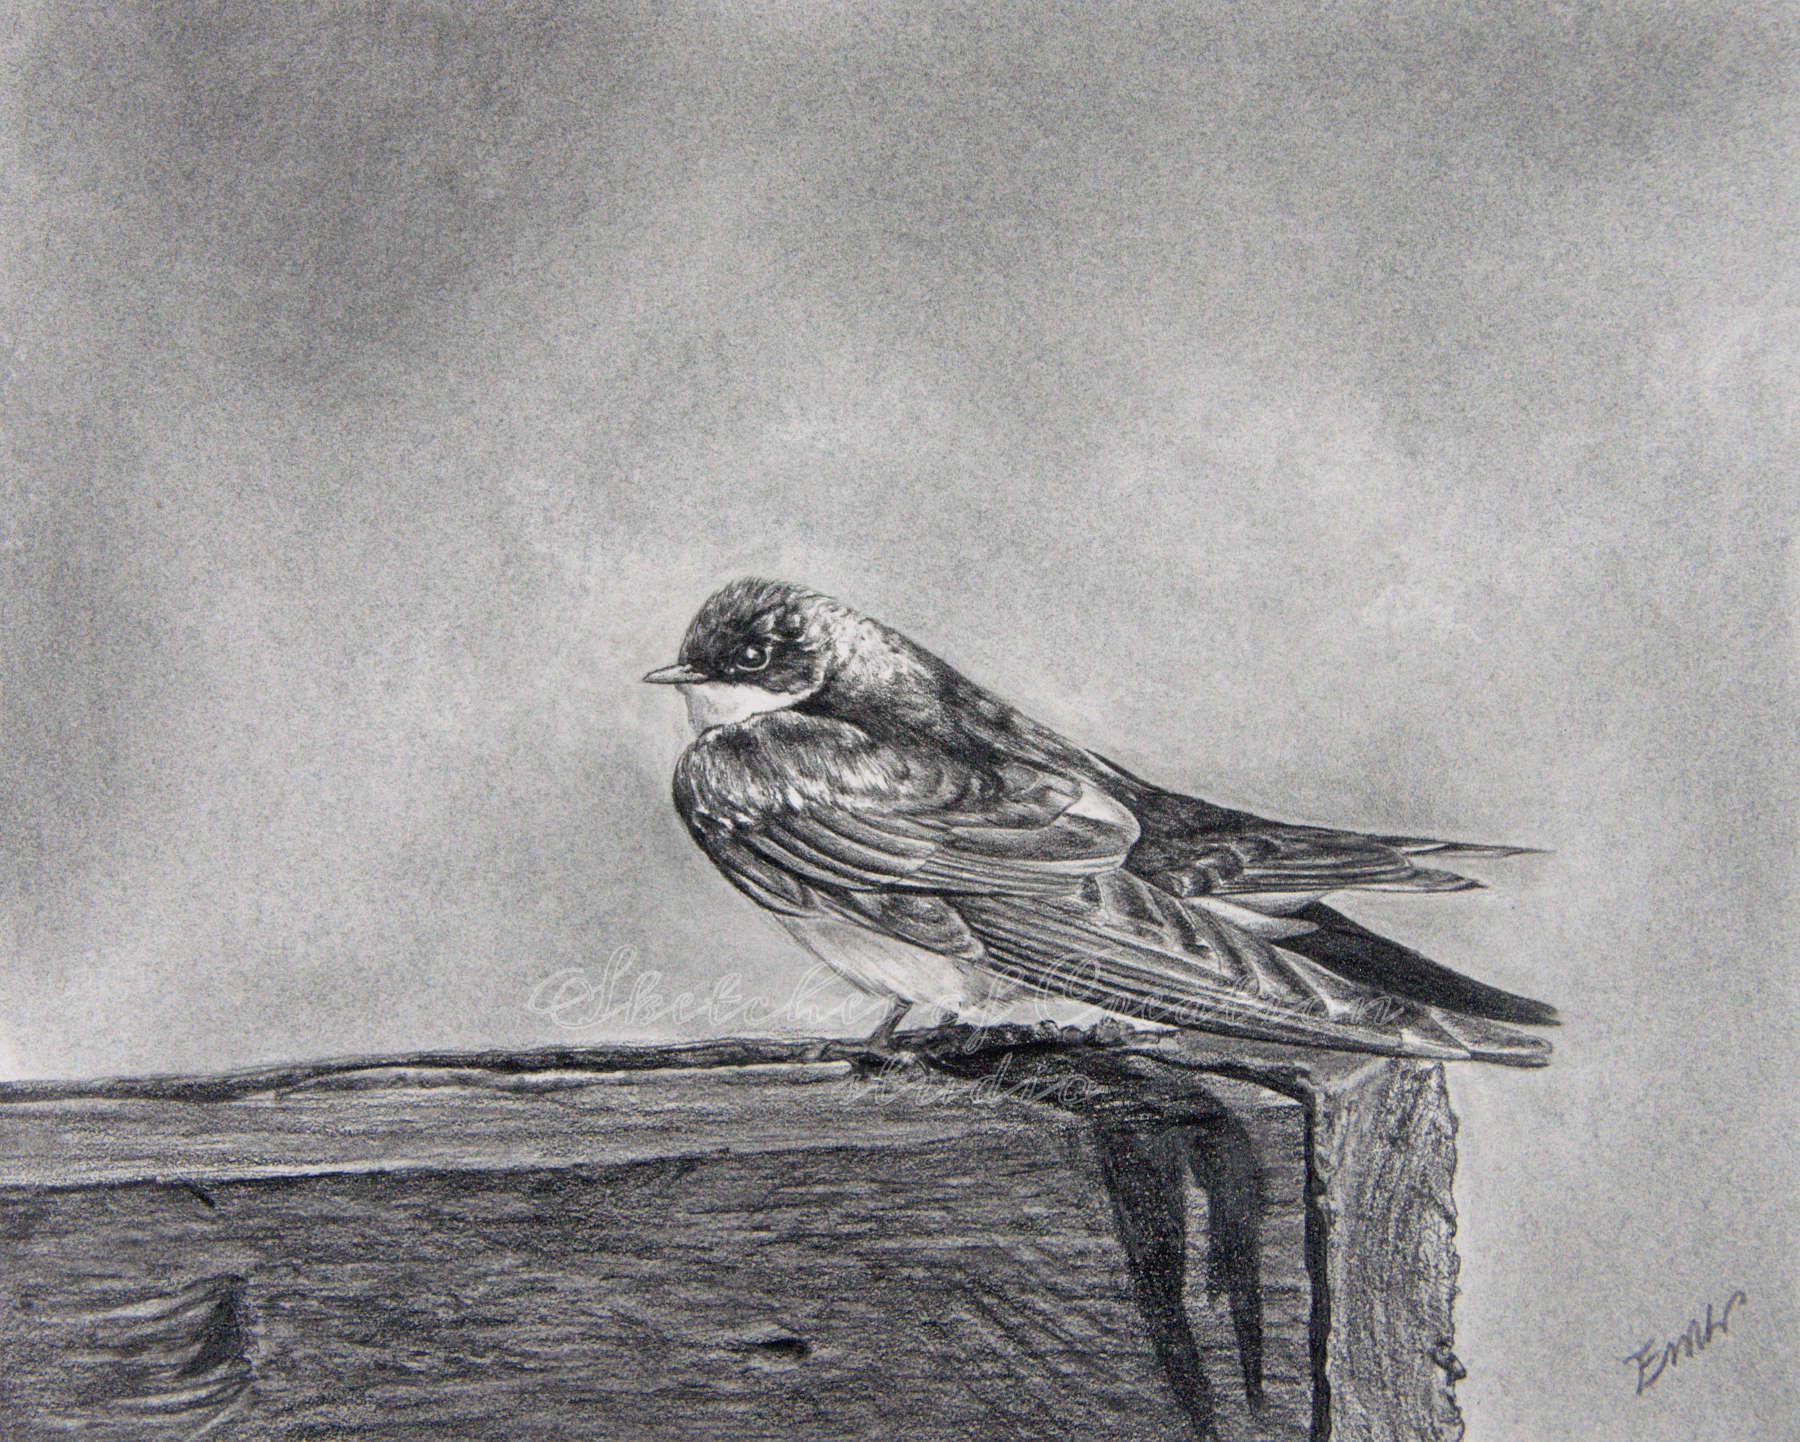 'Tree Swallow' a drawing of a tree swallow on a fence. 8x10 inches. Completed February 2020